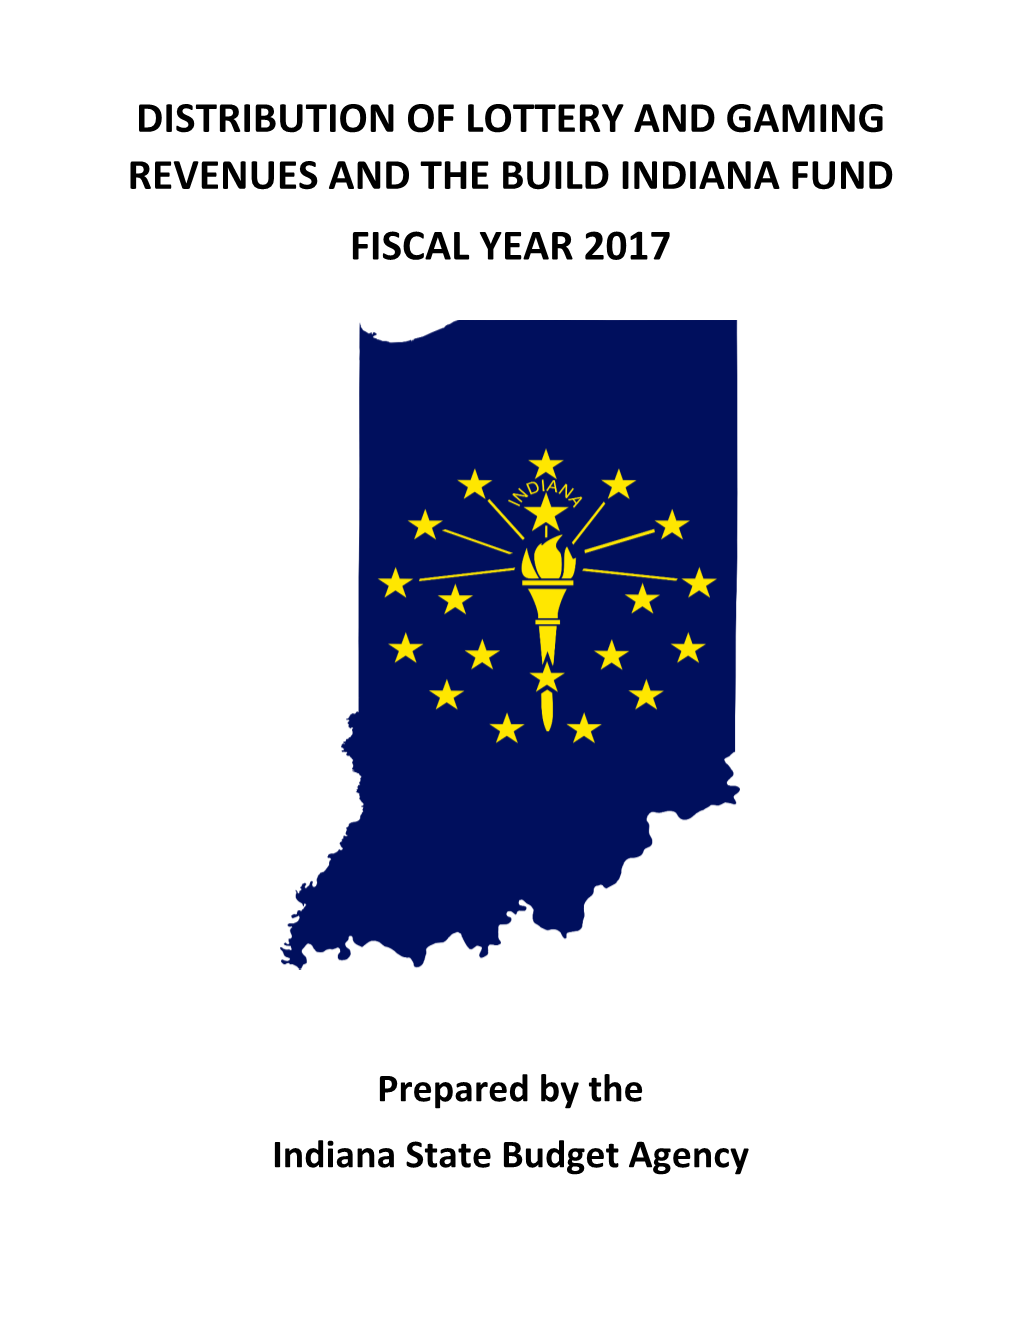 FY 2017 Distribution of Build Indiana Fund and Lottery and Gaming